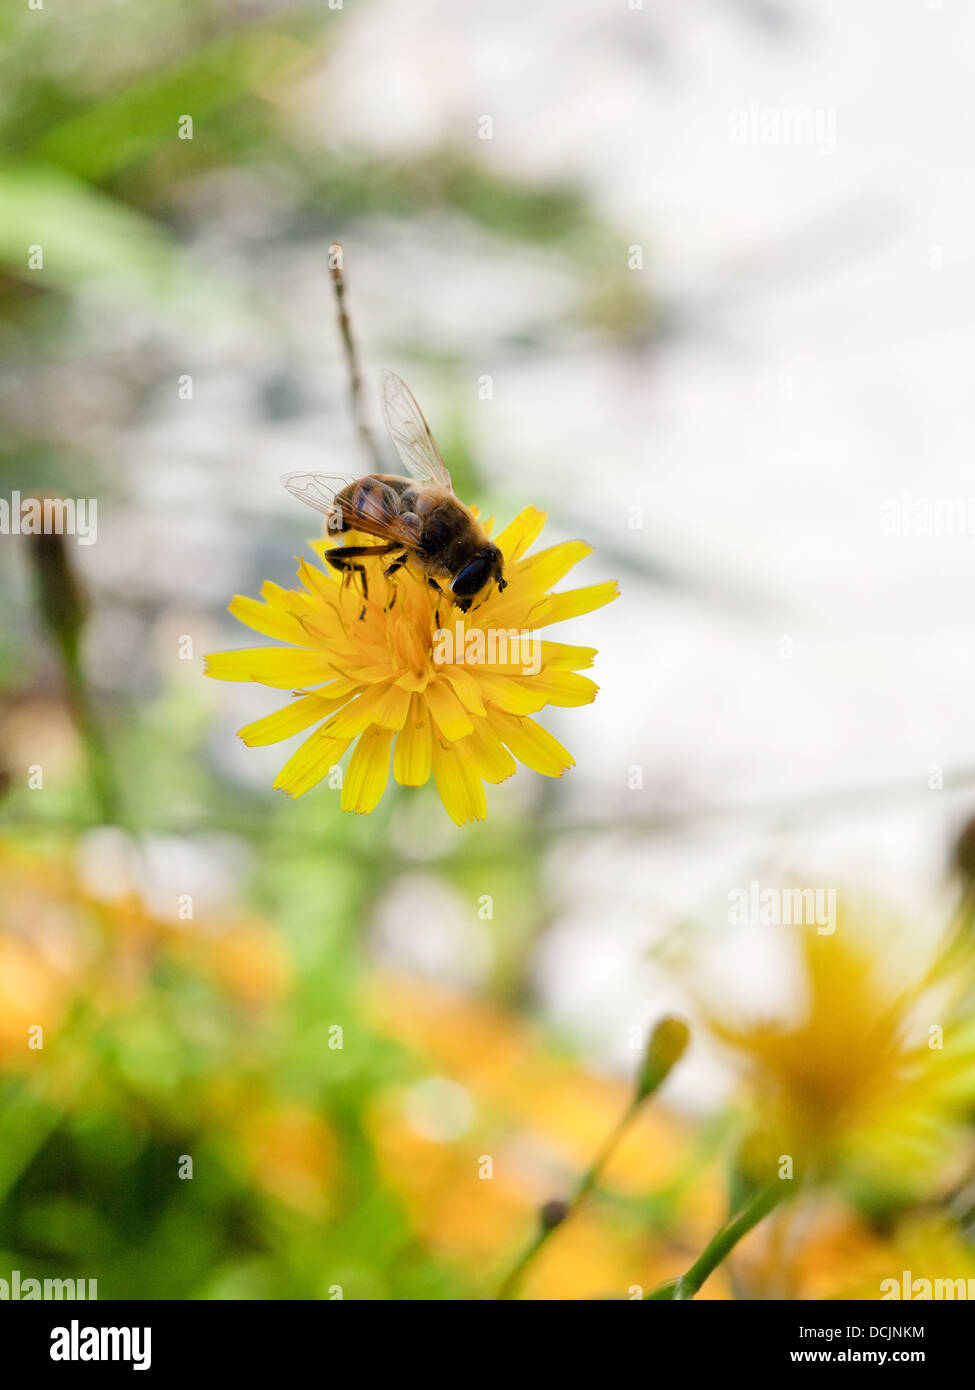 honey bee feed nectar from yellow flower of close up Stock Photo